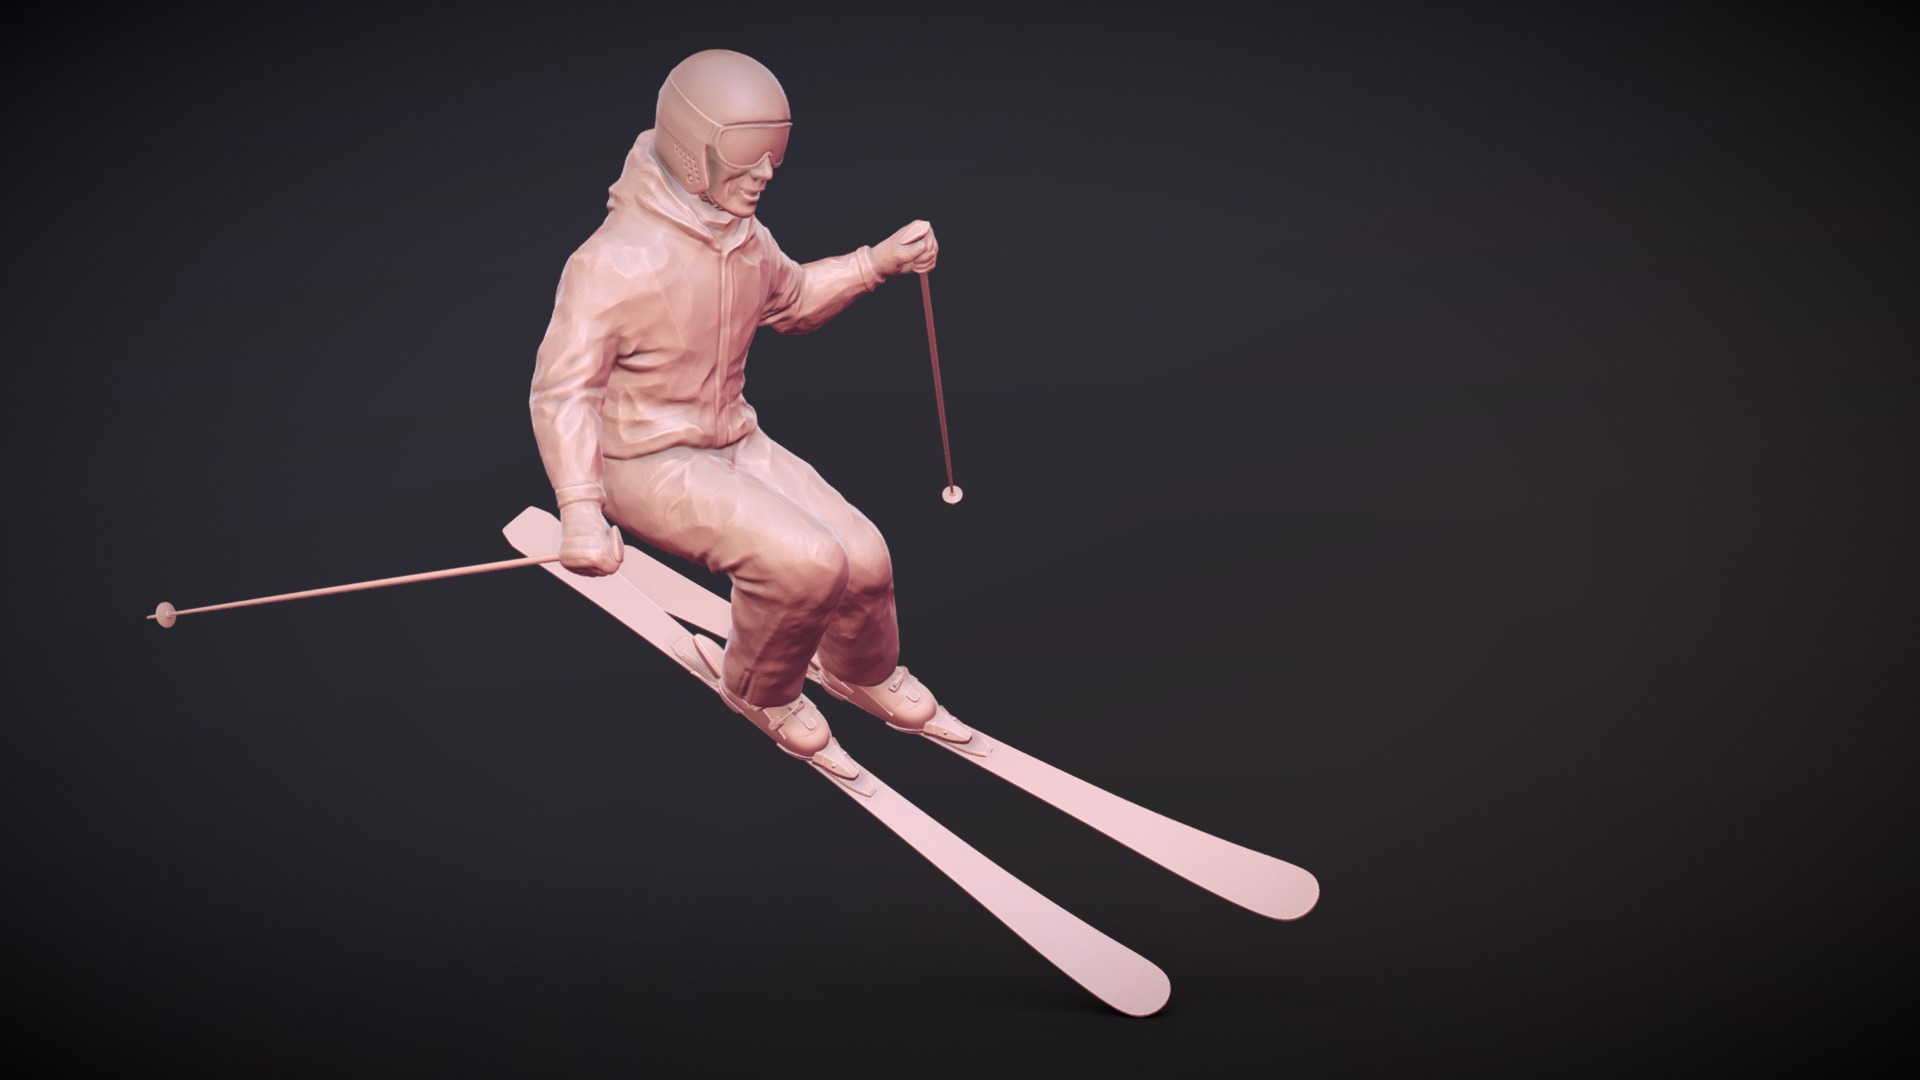 3D model Mountain-skier - This is a 3D model of the Mountain-skier. The 3D model is about a person in a garment.